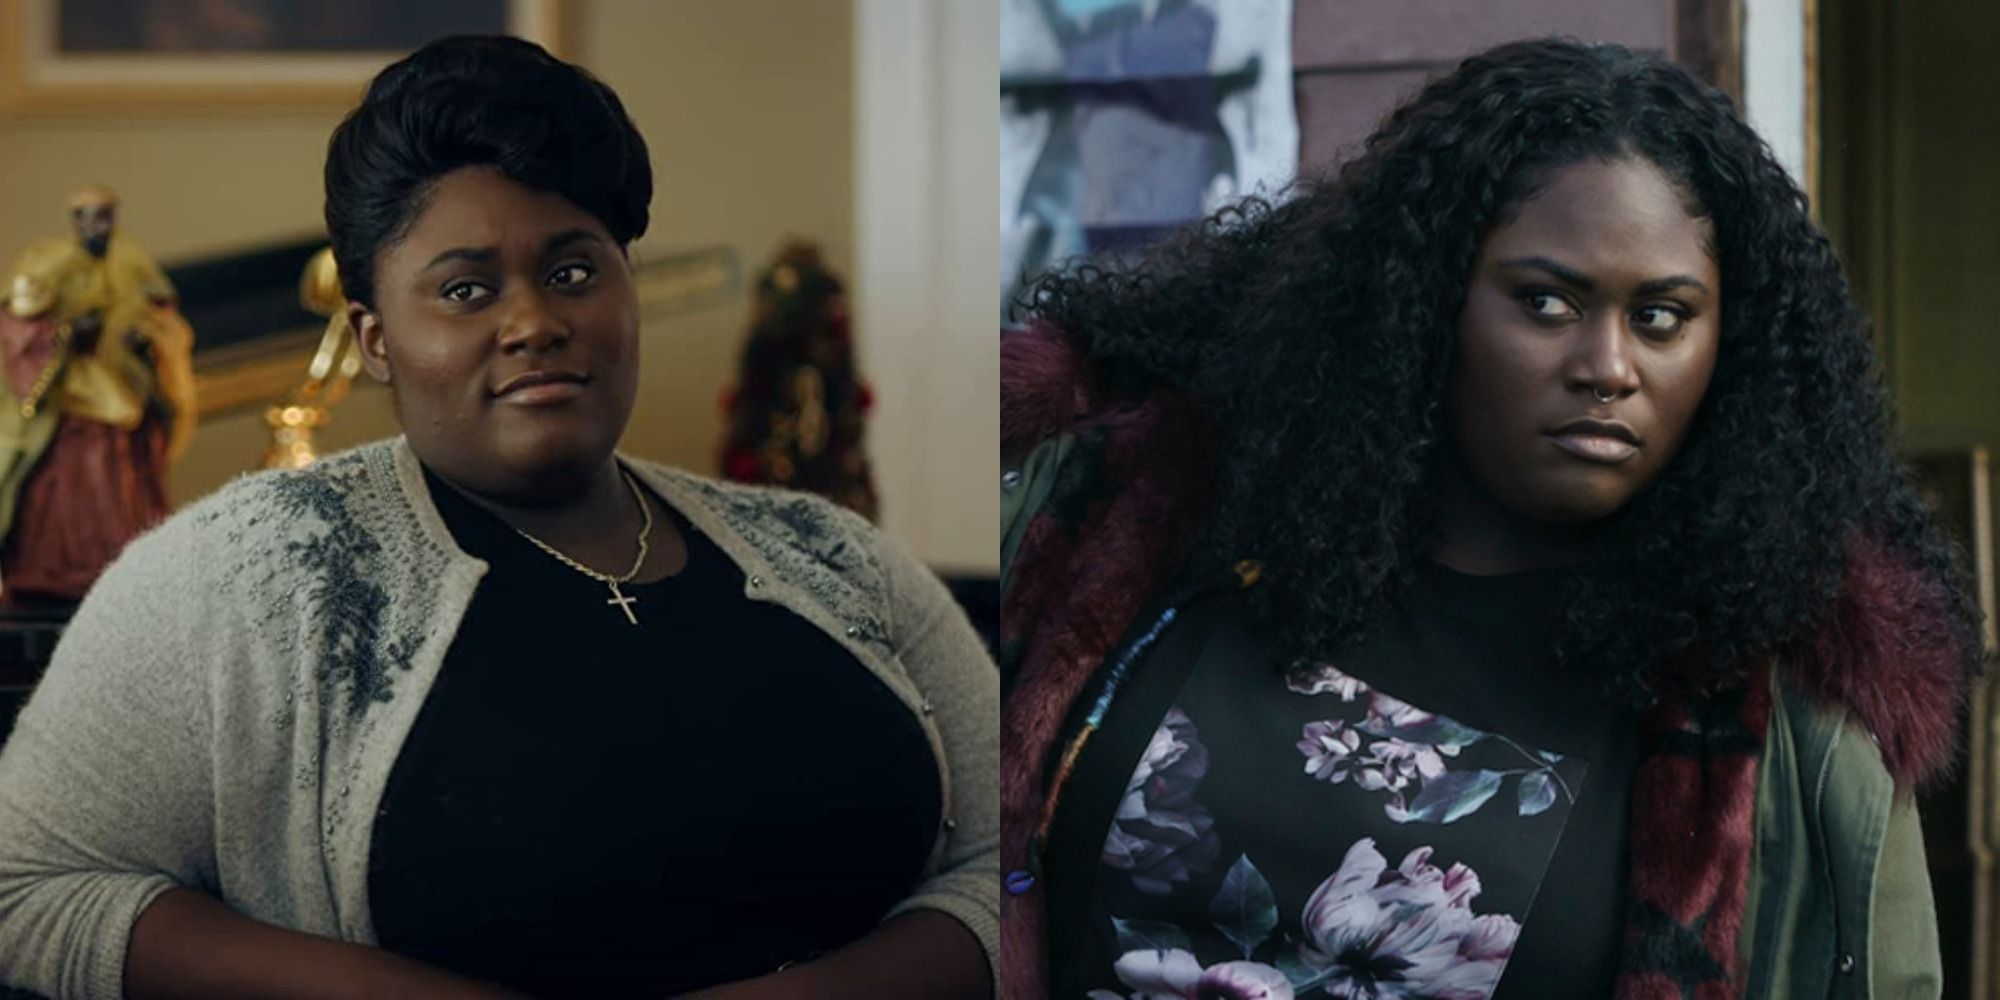 Danielle Brooks Her 10 Best Roles Ranked According To IMDb